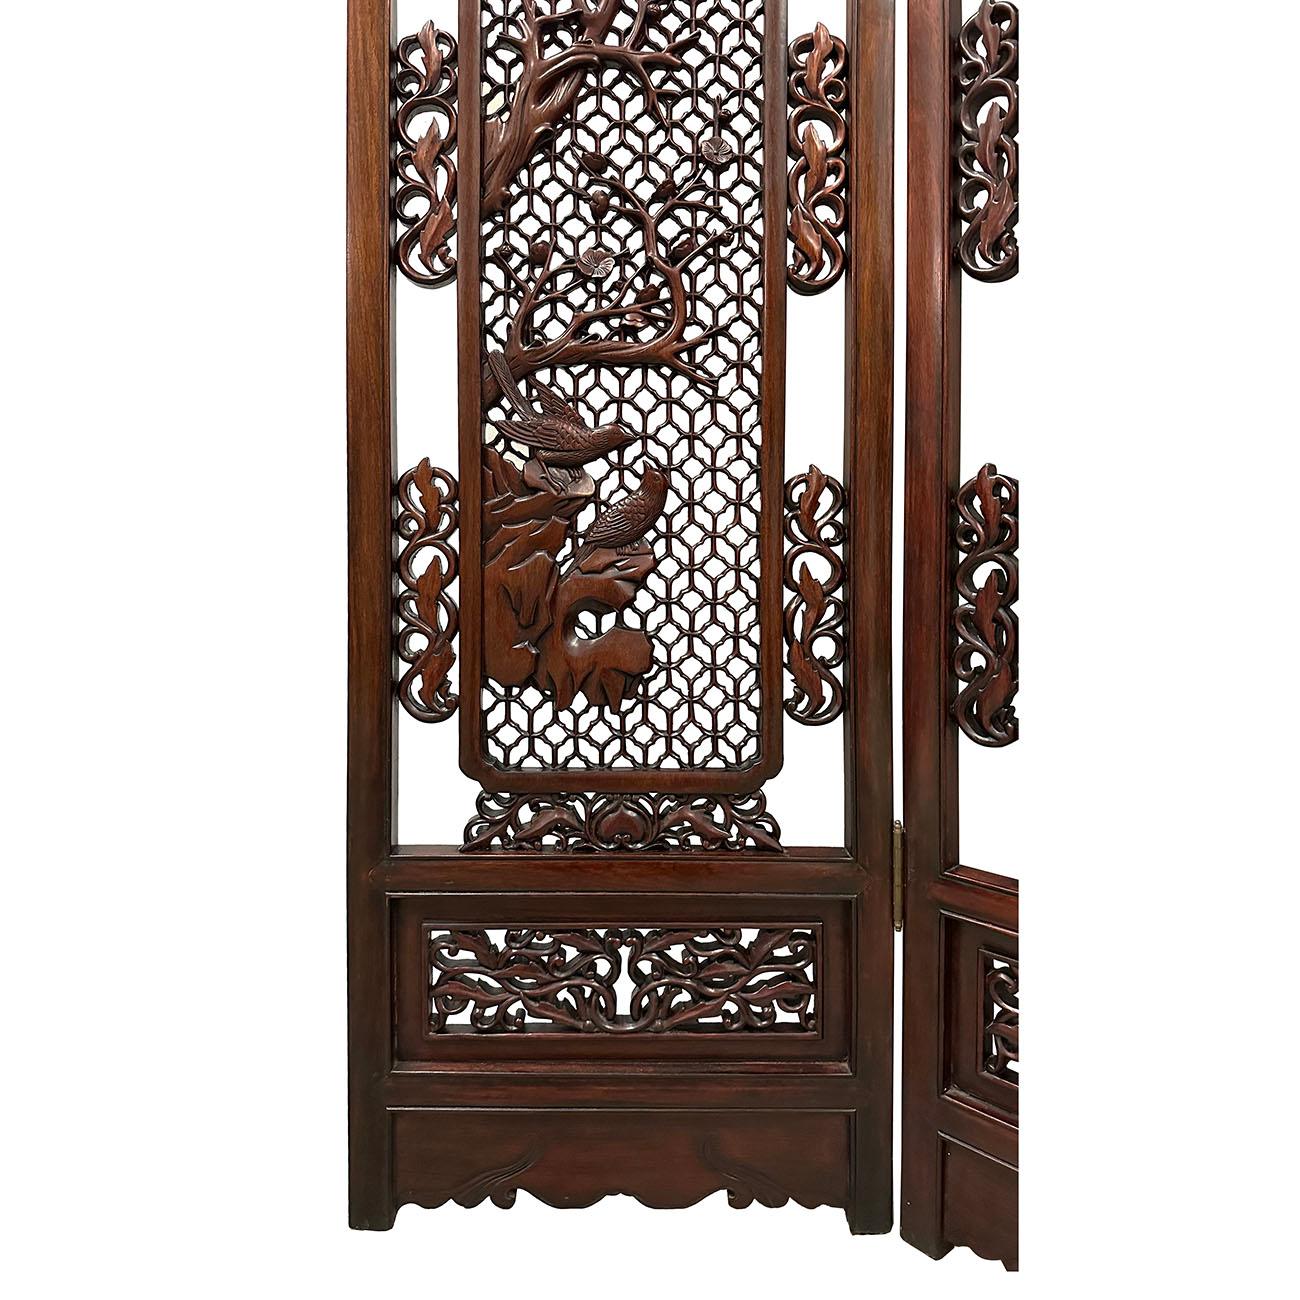 Mid-20th Century Chinese Rosewood Open Carved Screen/Room Divider In Good Condition For Sale In Pomona, CA